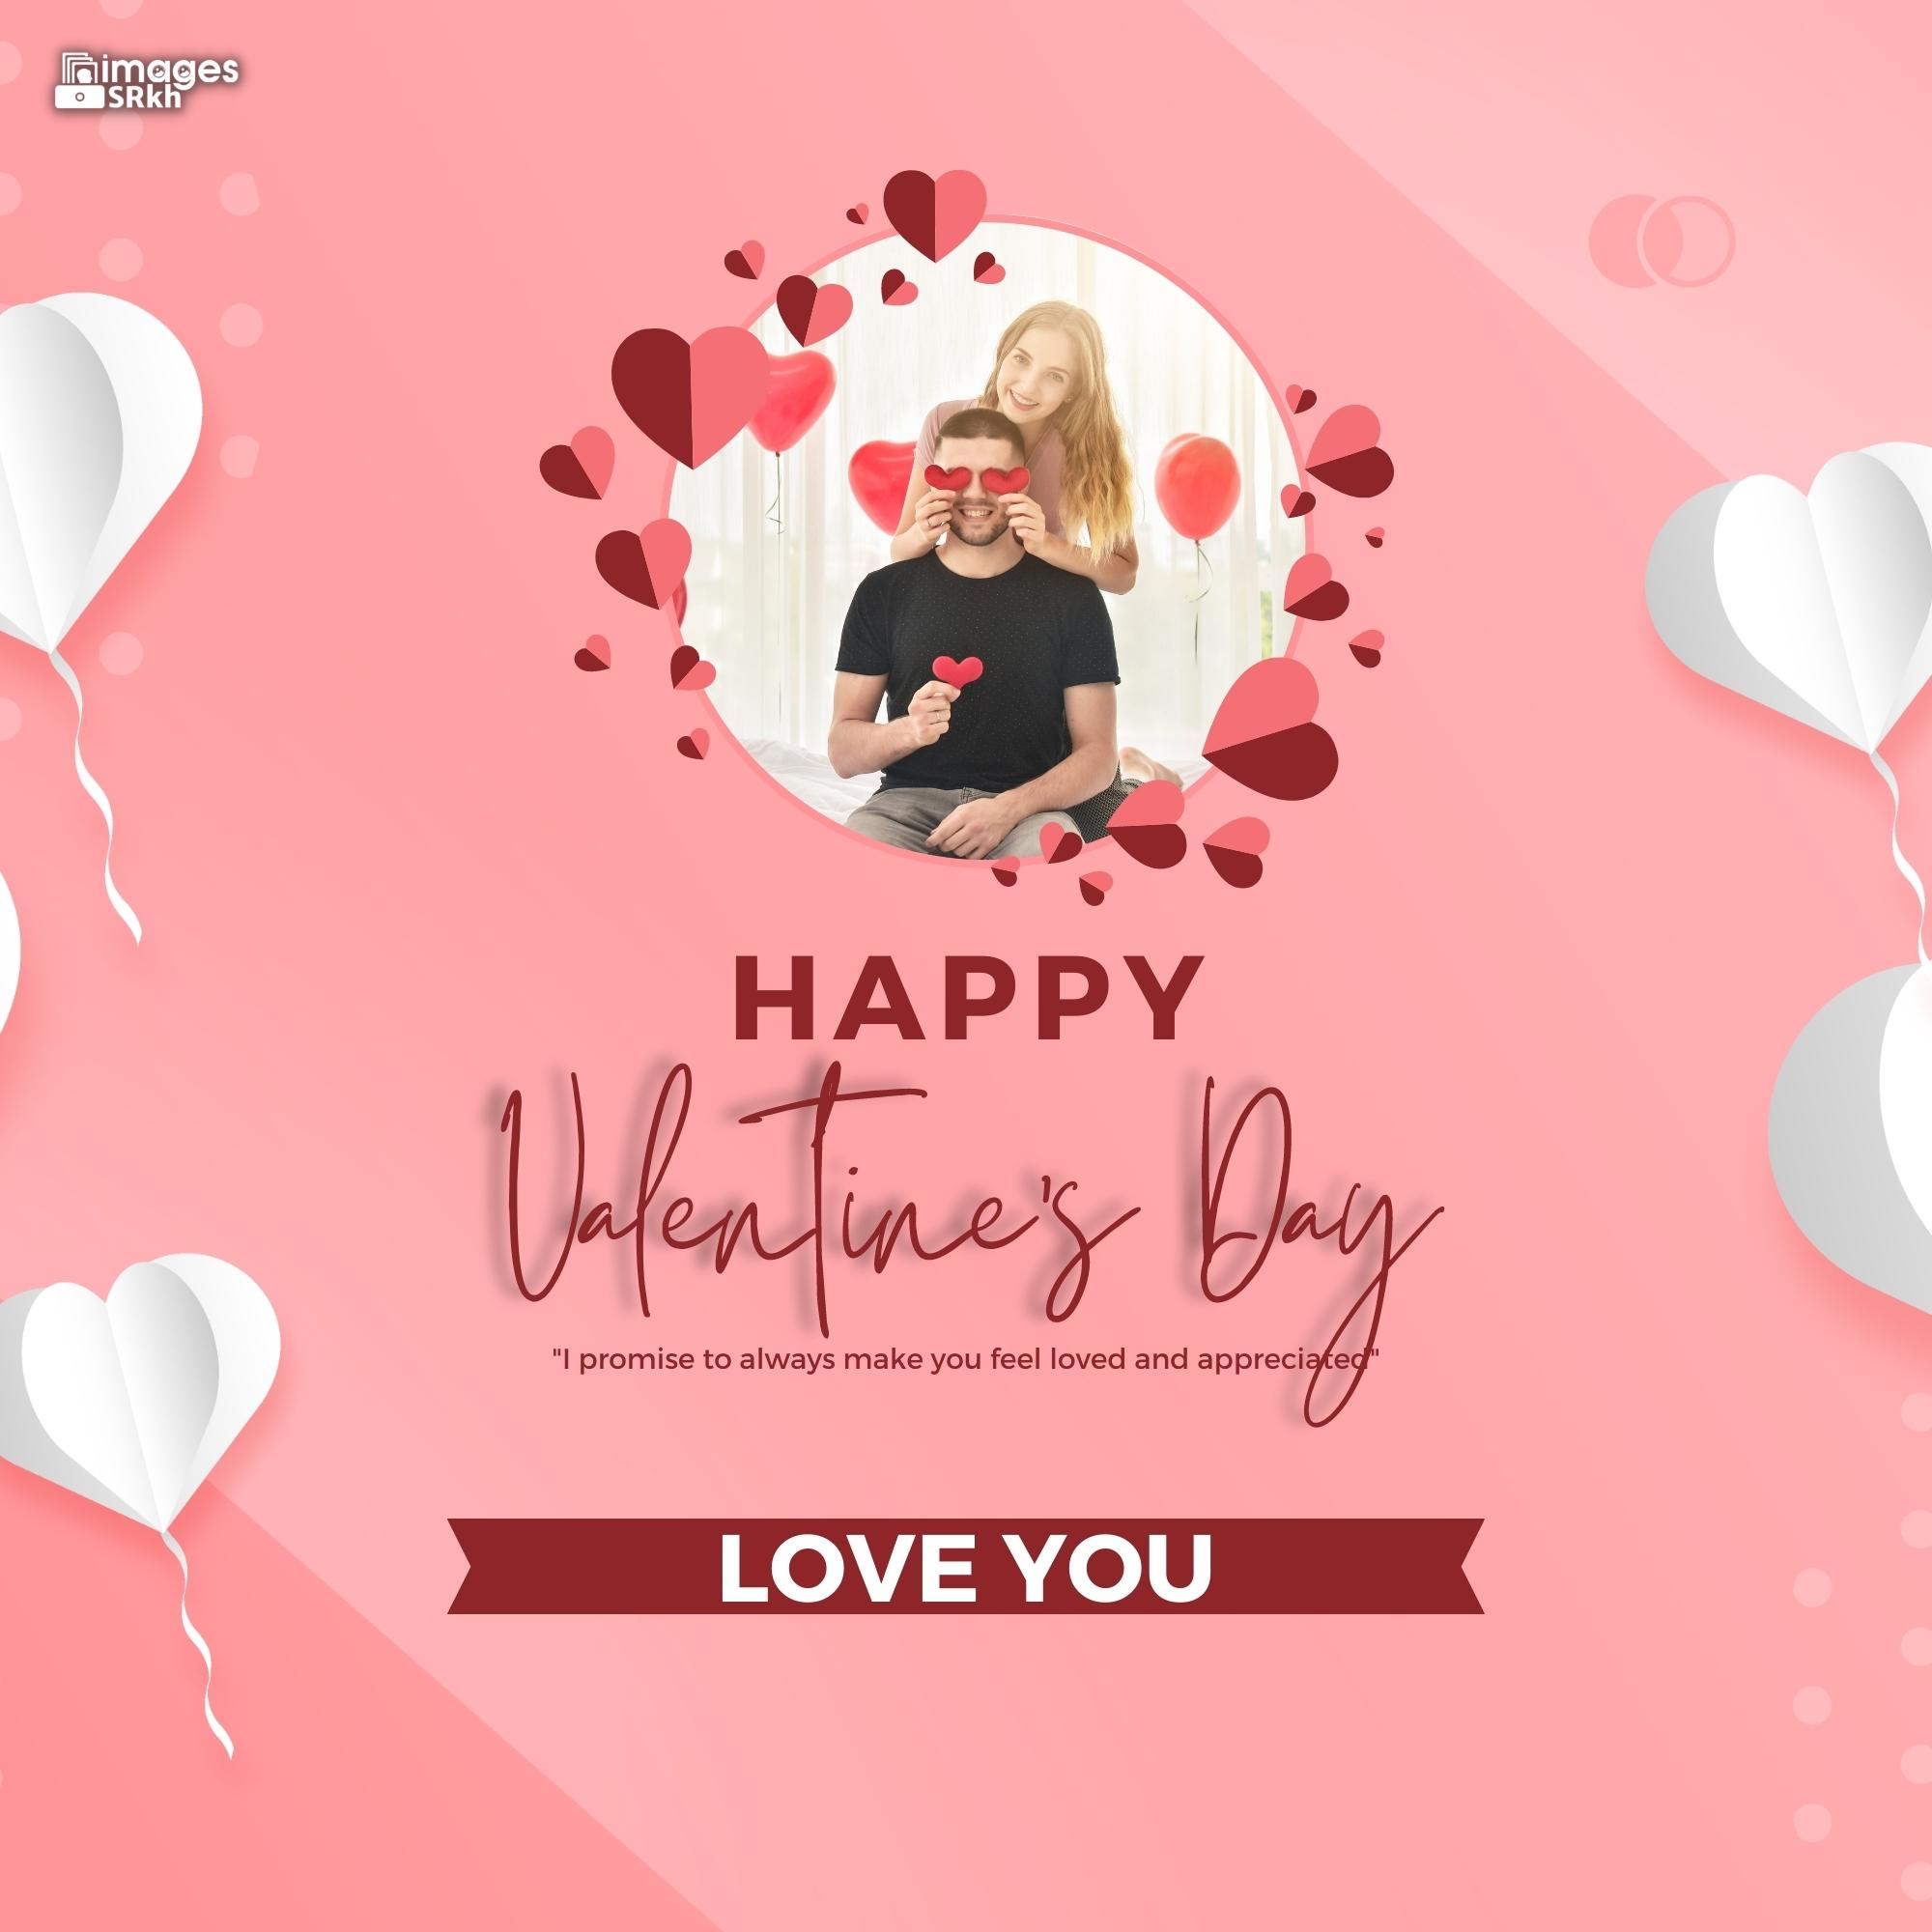 Happy Valentines Day | 499 | PREMIUM IMAGES | Wishes for Love